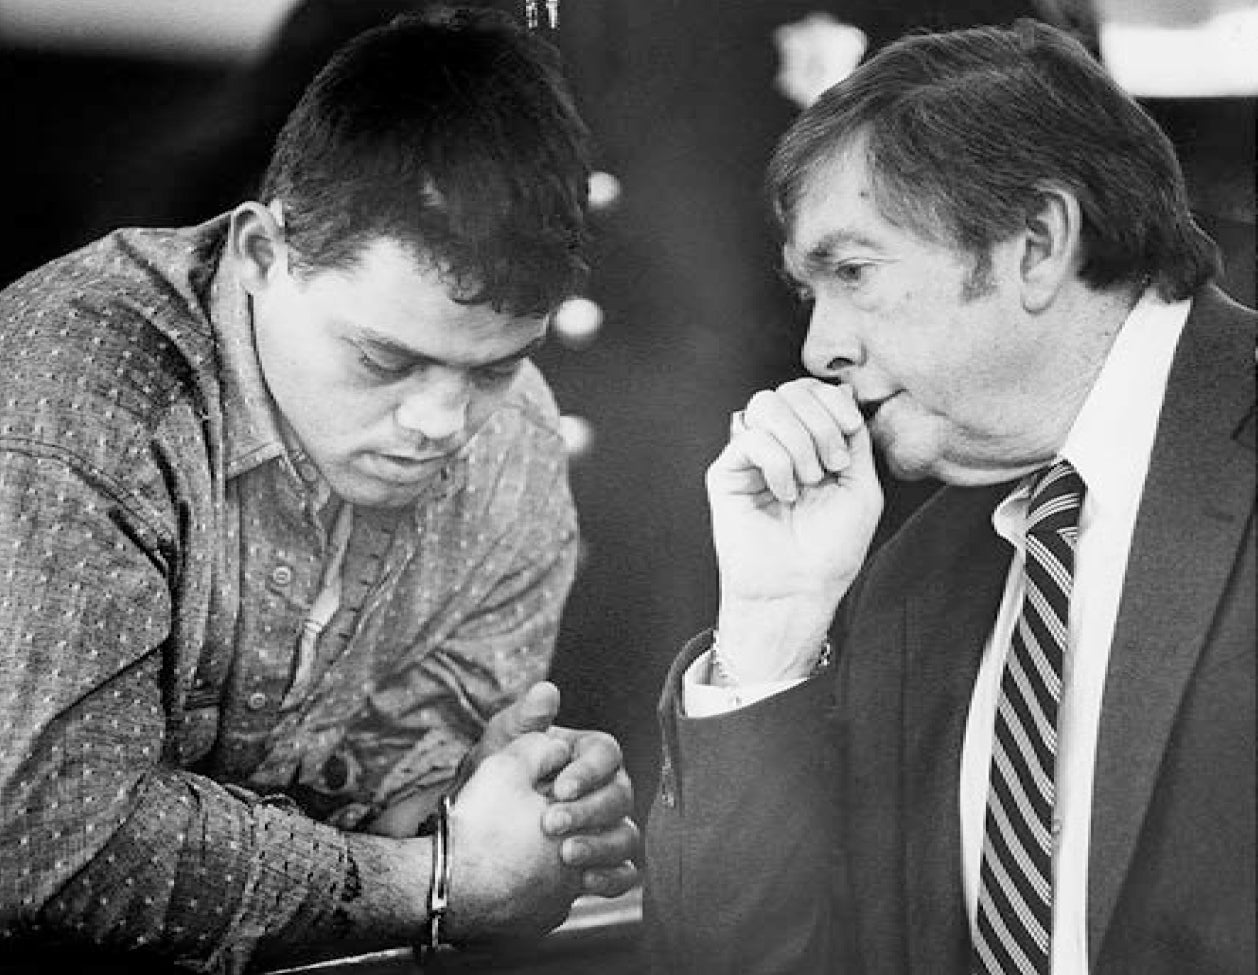 Anthony DeGrazia, accused of attacking prostitutes, with his first attorney, Edward Harrington, in New Bedford Superior Court on May 11, 1989 (Standard-Times photo by Hank Seaman)